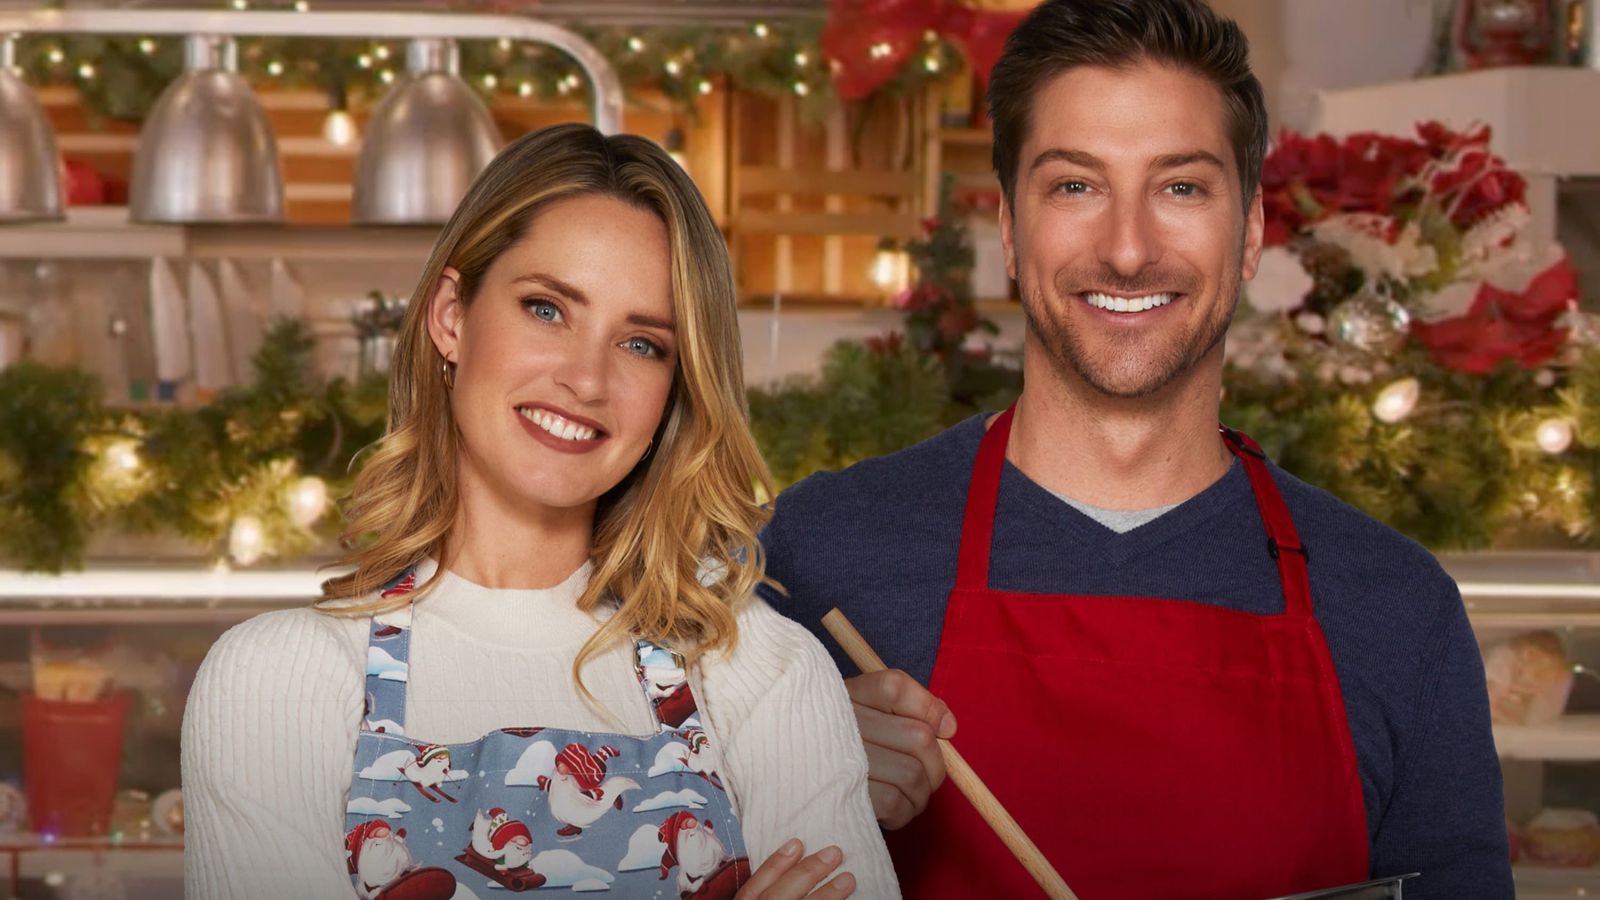 Watch Movie Catering Christmas (2022) Full HD Full Movie Free Online